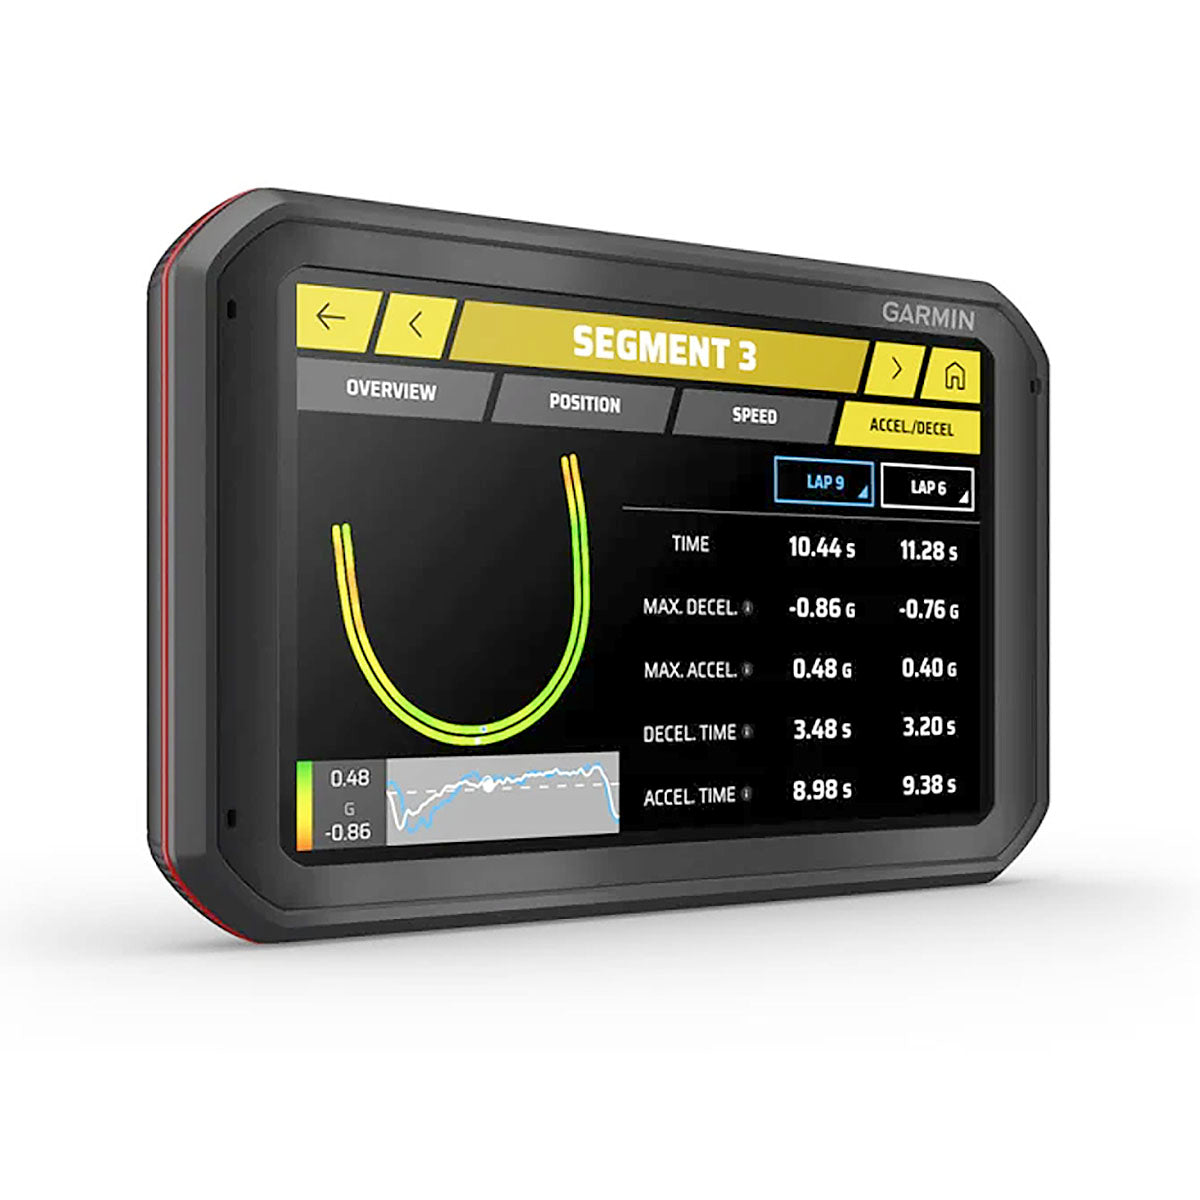 Garmin Catalyst Driving Performance Optimizer: A high-tech tool for driving enthusiasts.